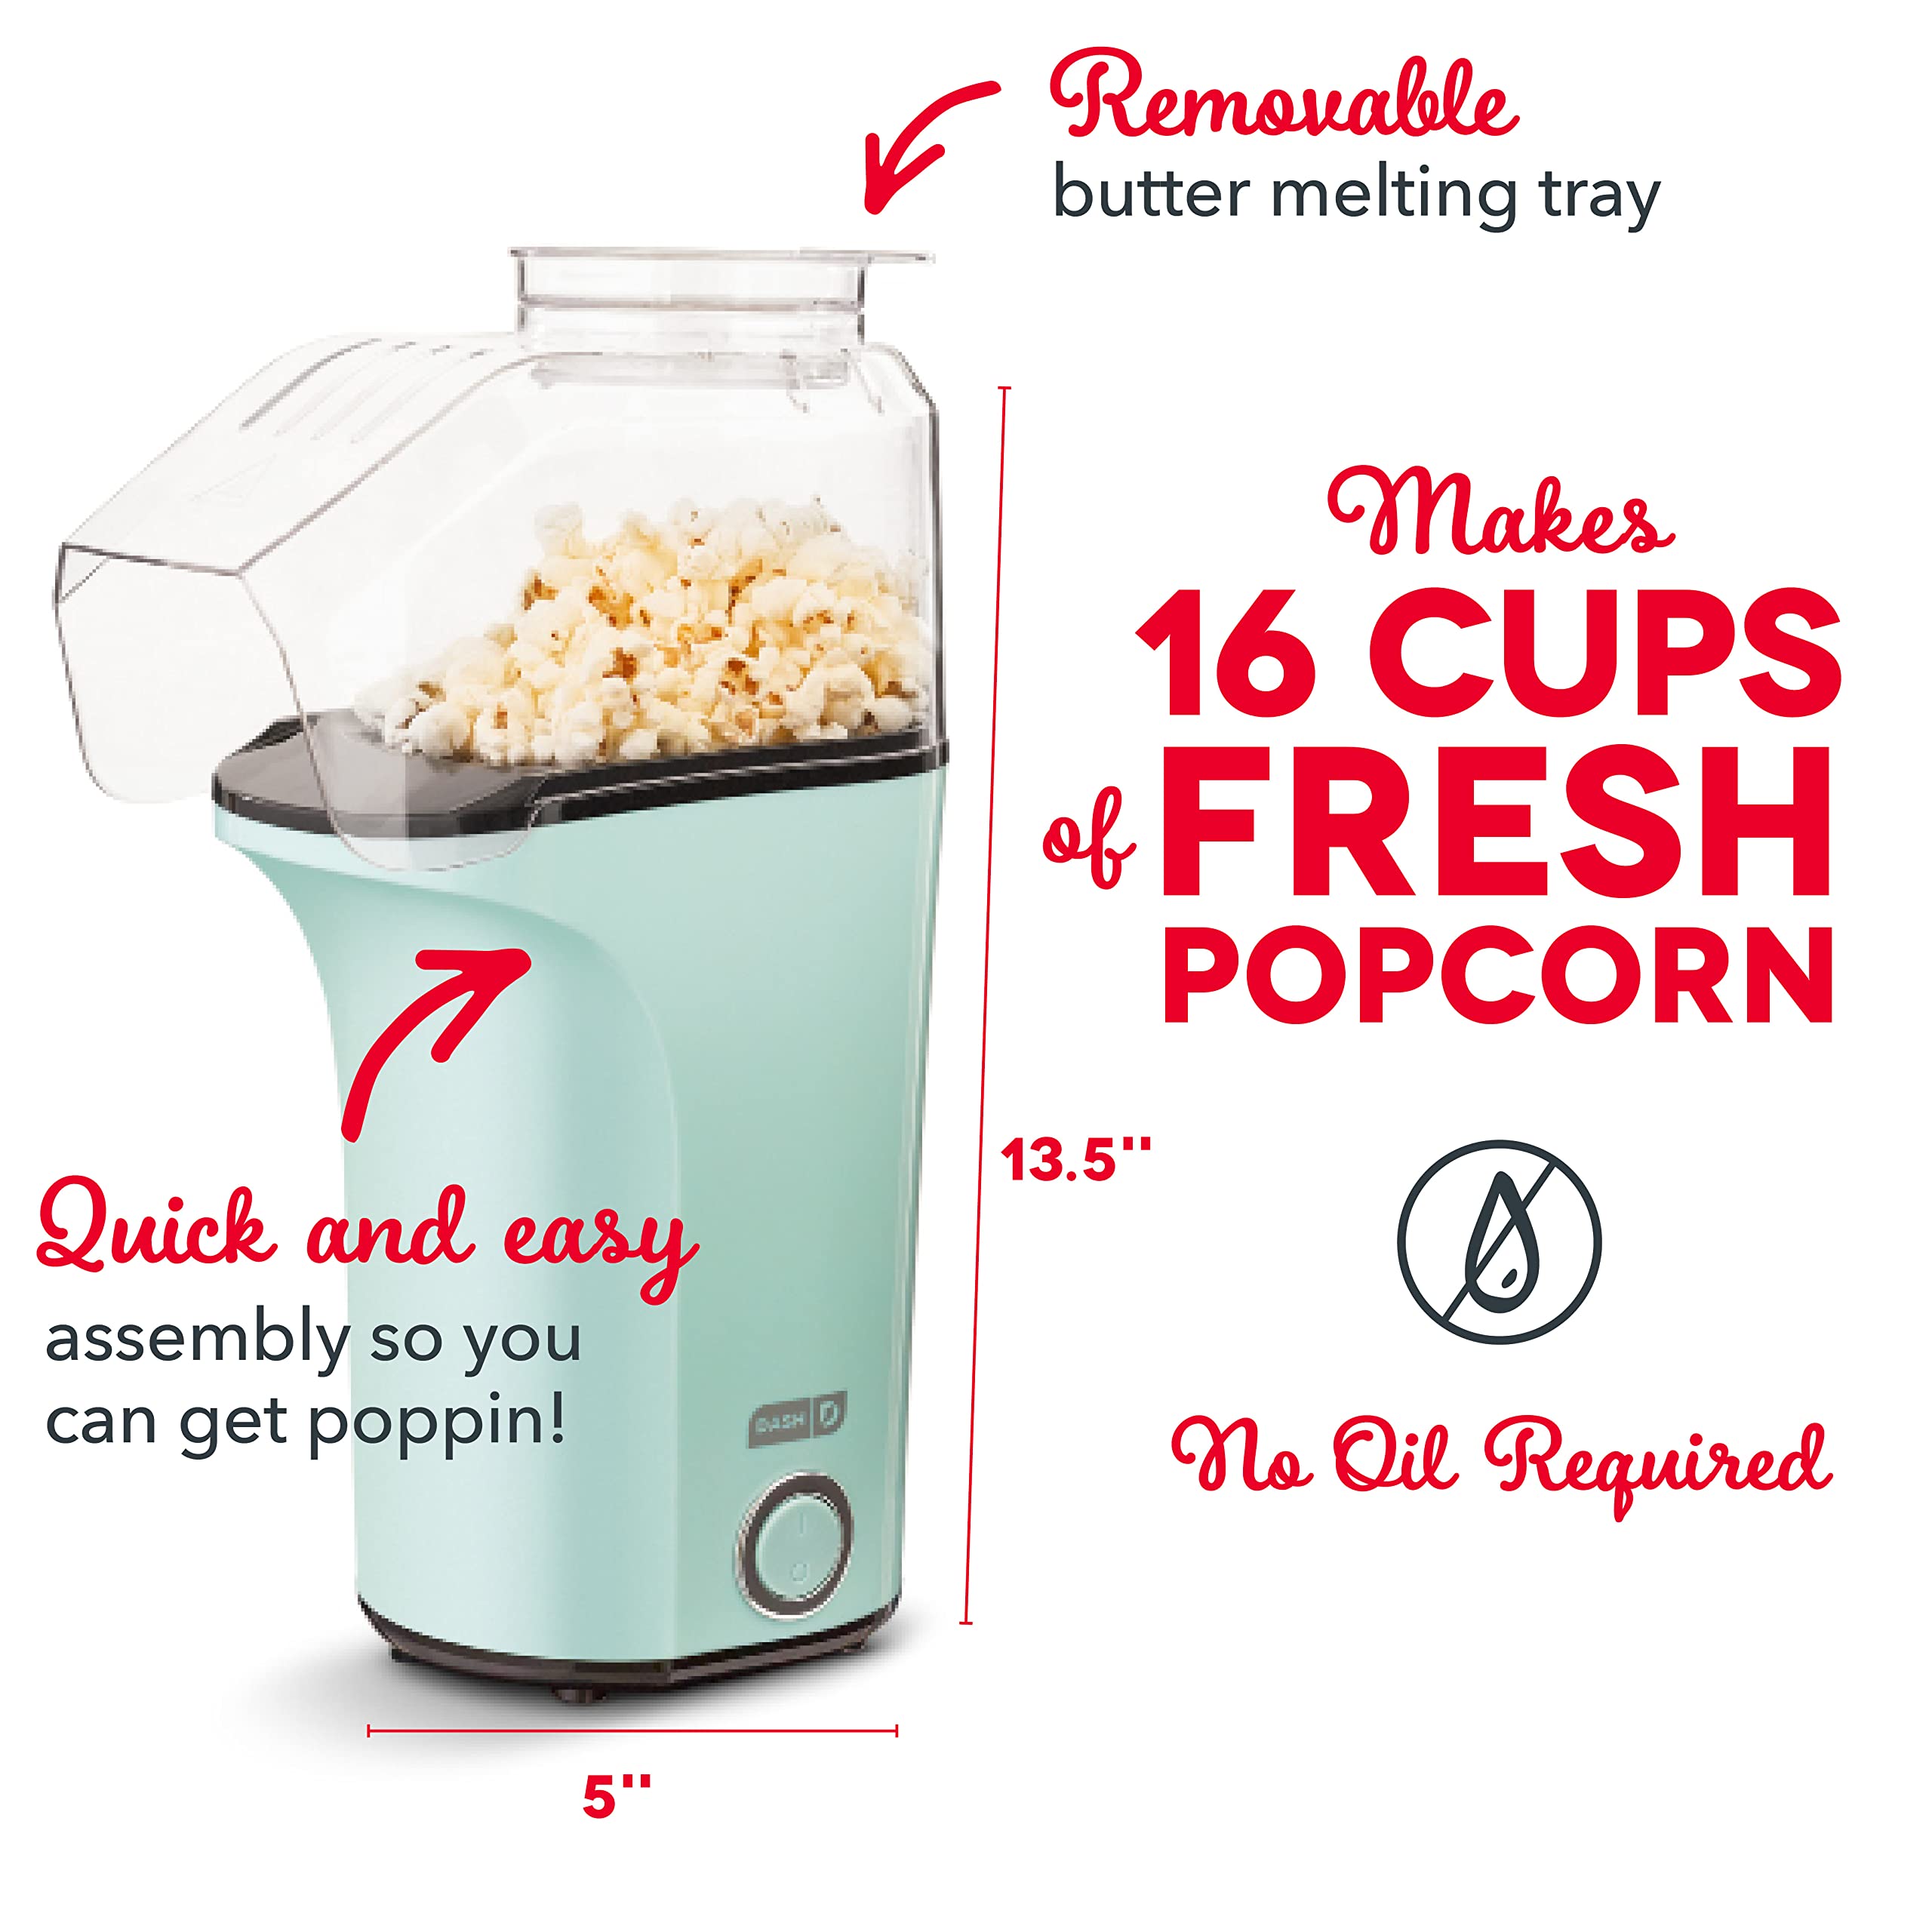 DASH Hot Air Popcorn Popper Maker with Measuring Cup to Portion Popping Corn Kernels + Melt Butter, 16 Cups - Aqua